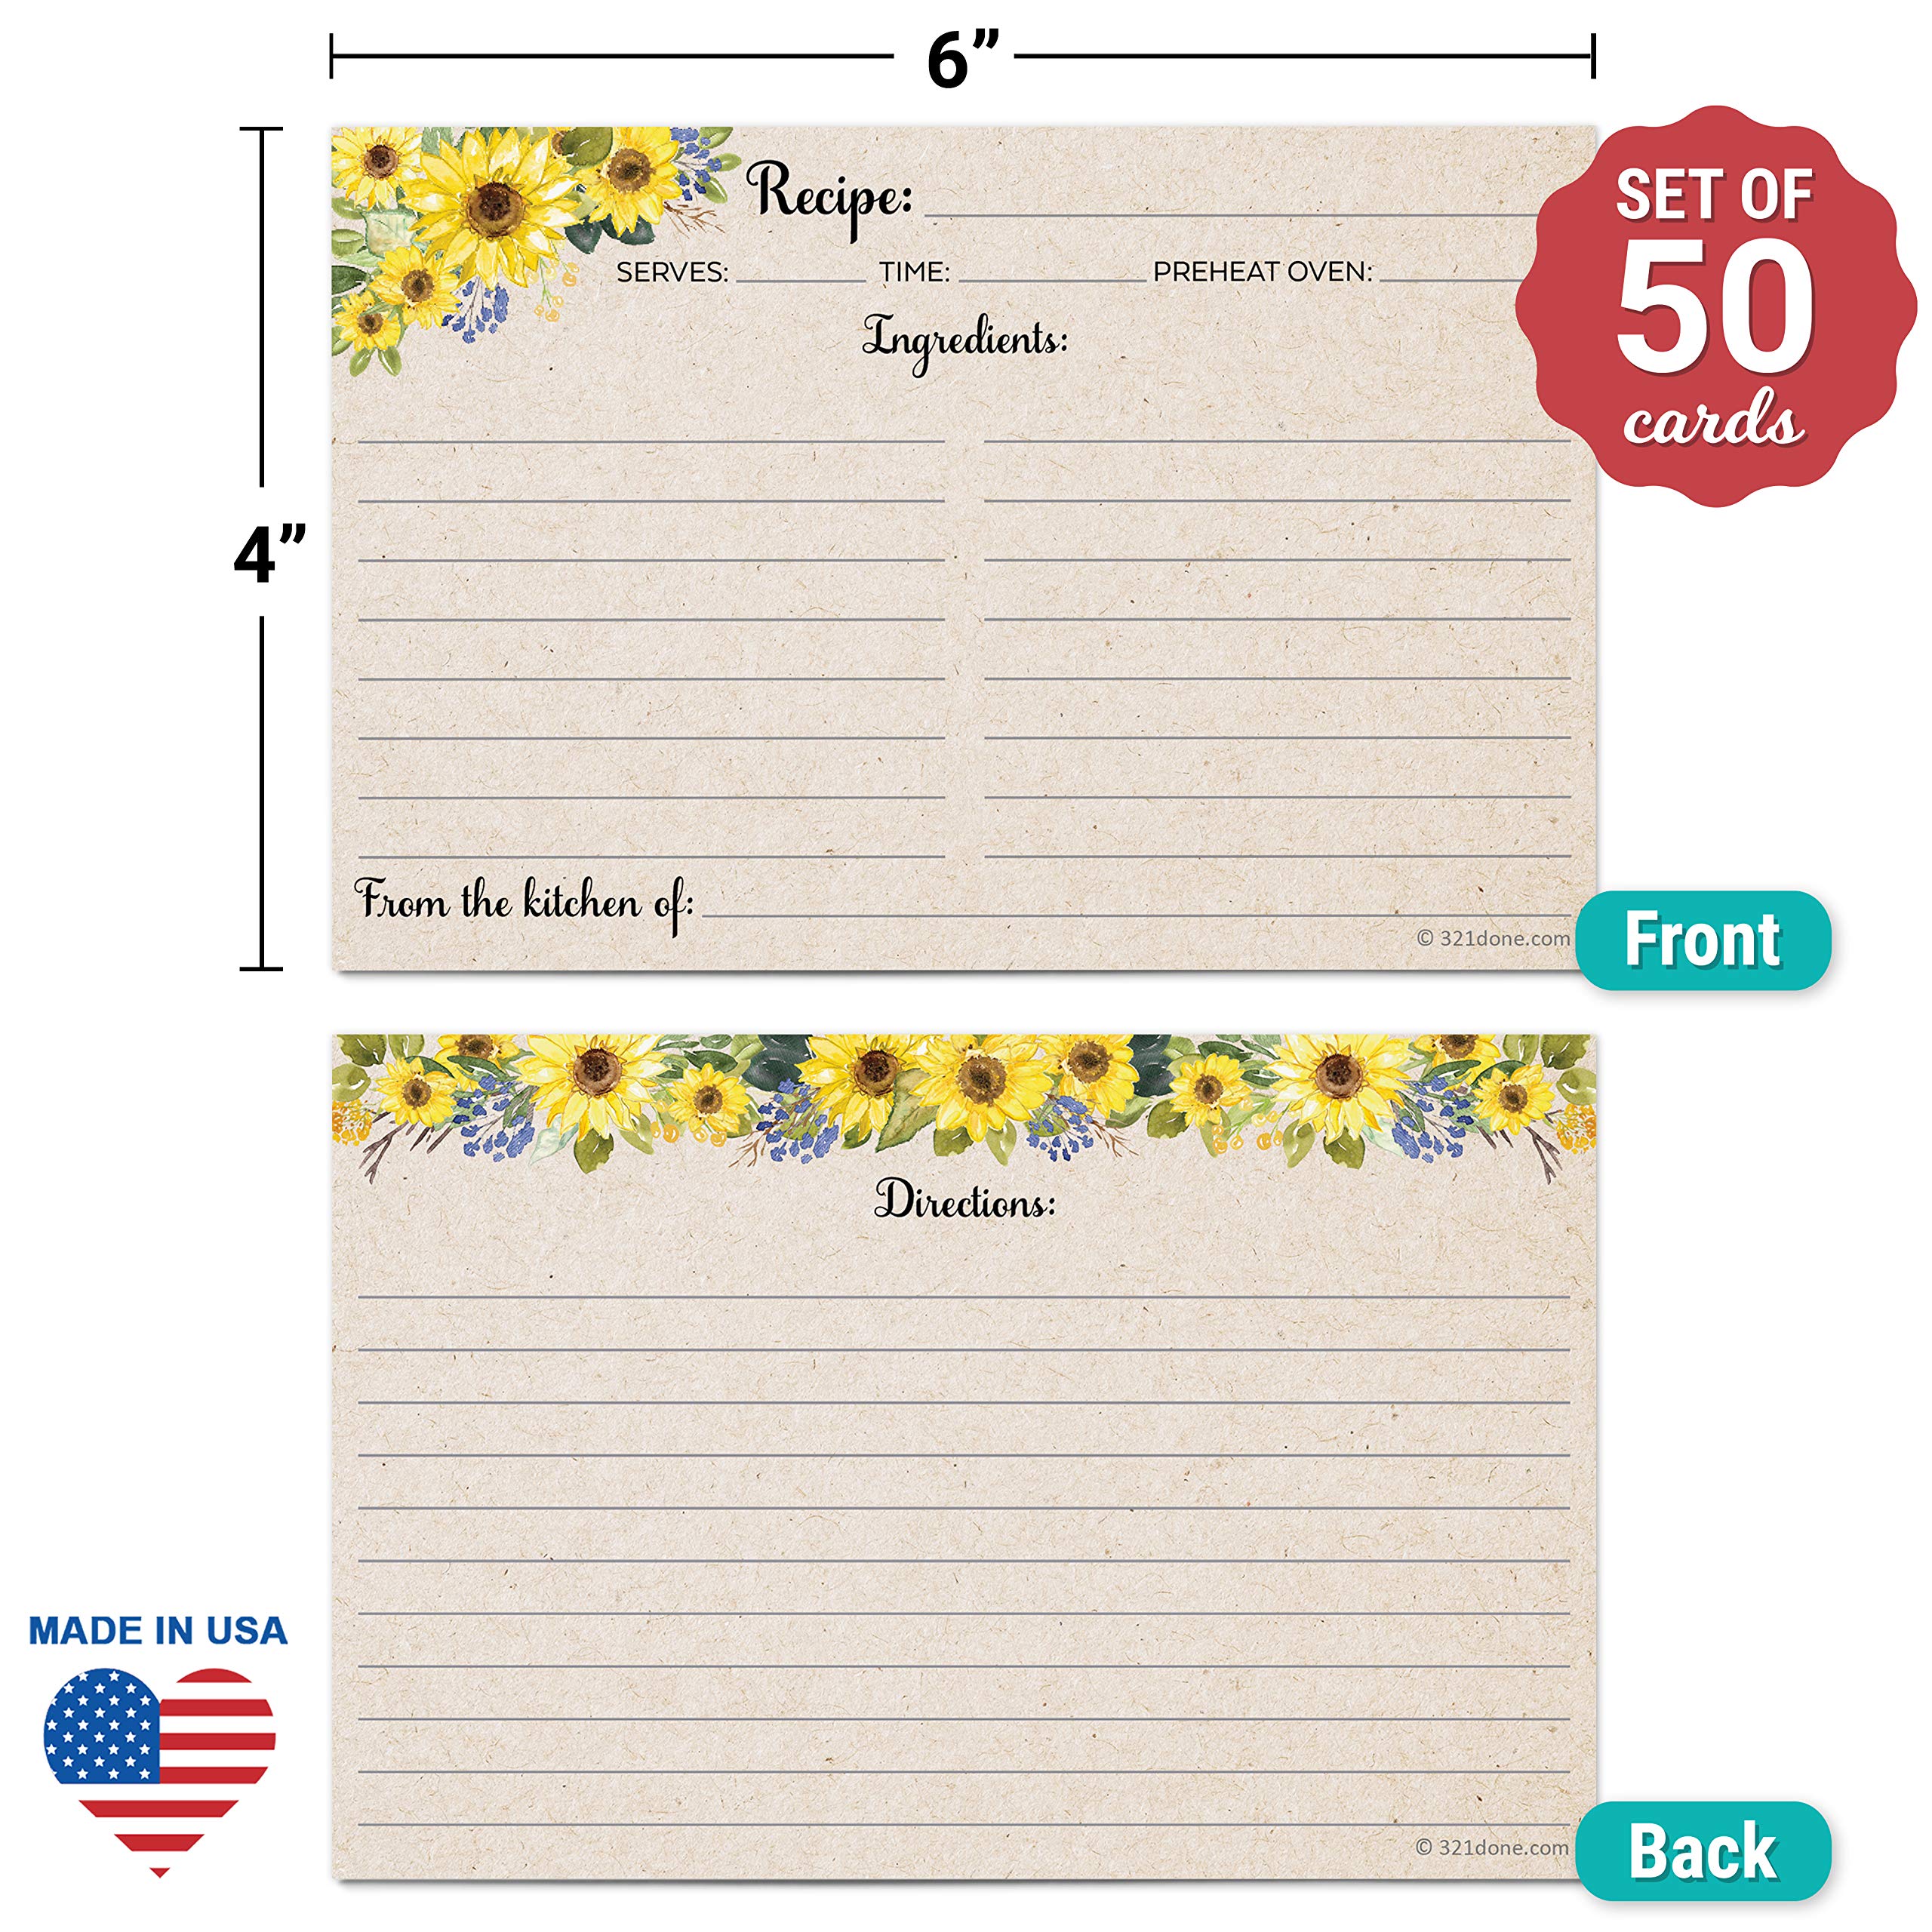 321Done Sunflower Recipe Cards (Set of 50) Large 4x6 - Rustic Kraft Tan, From the Kitchen Of - Double-Sided for Weddings, Bridal, Baby Shower - Made in USA